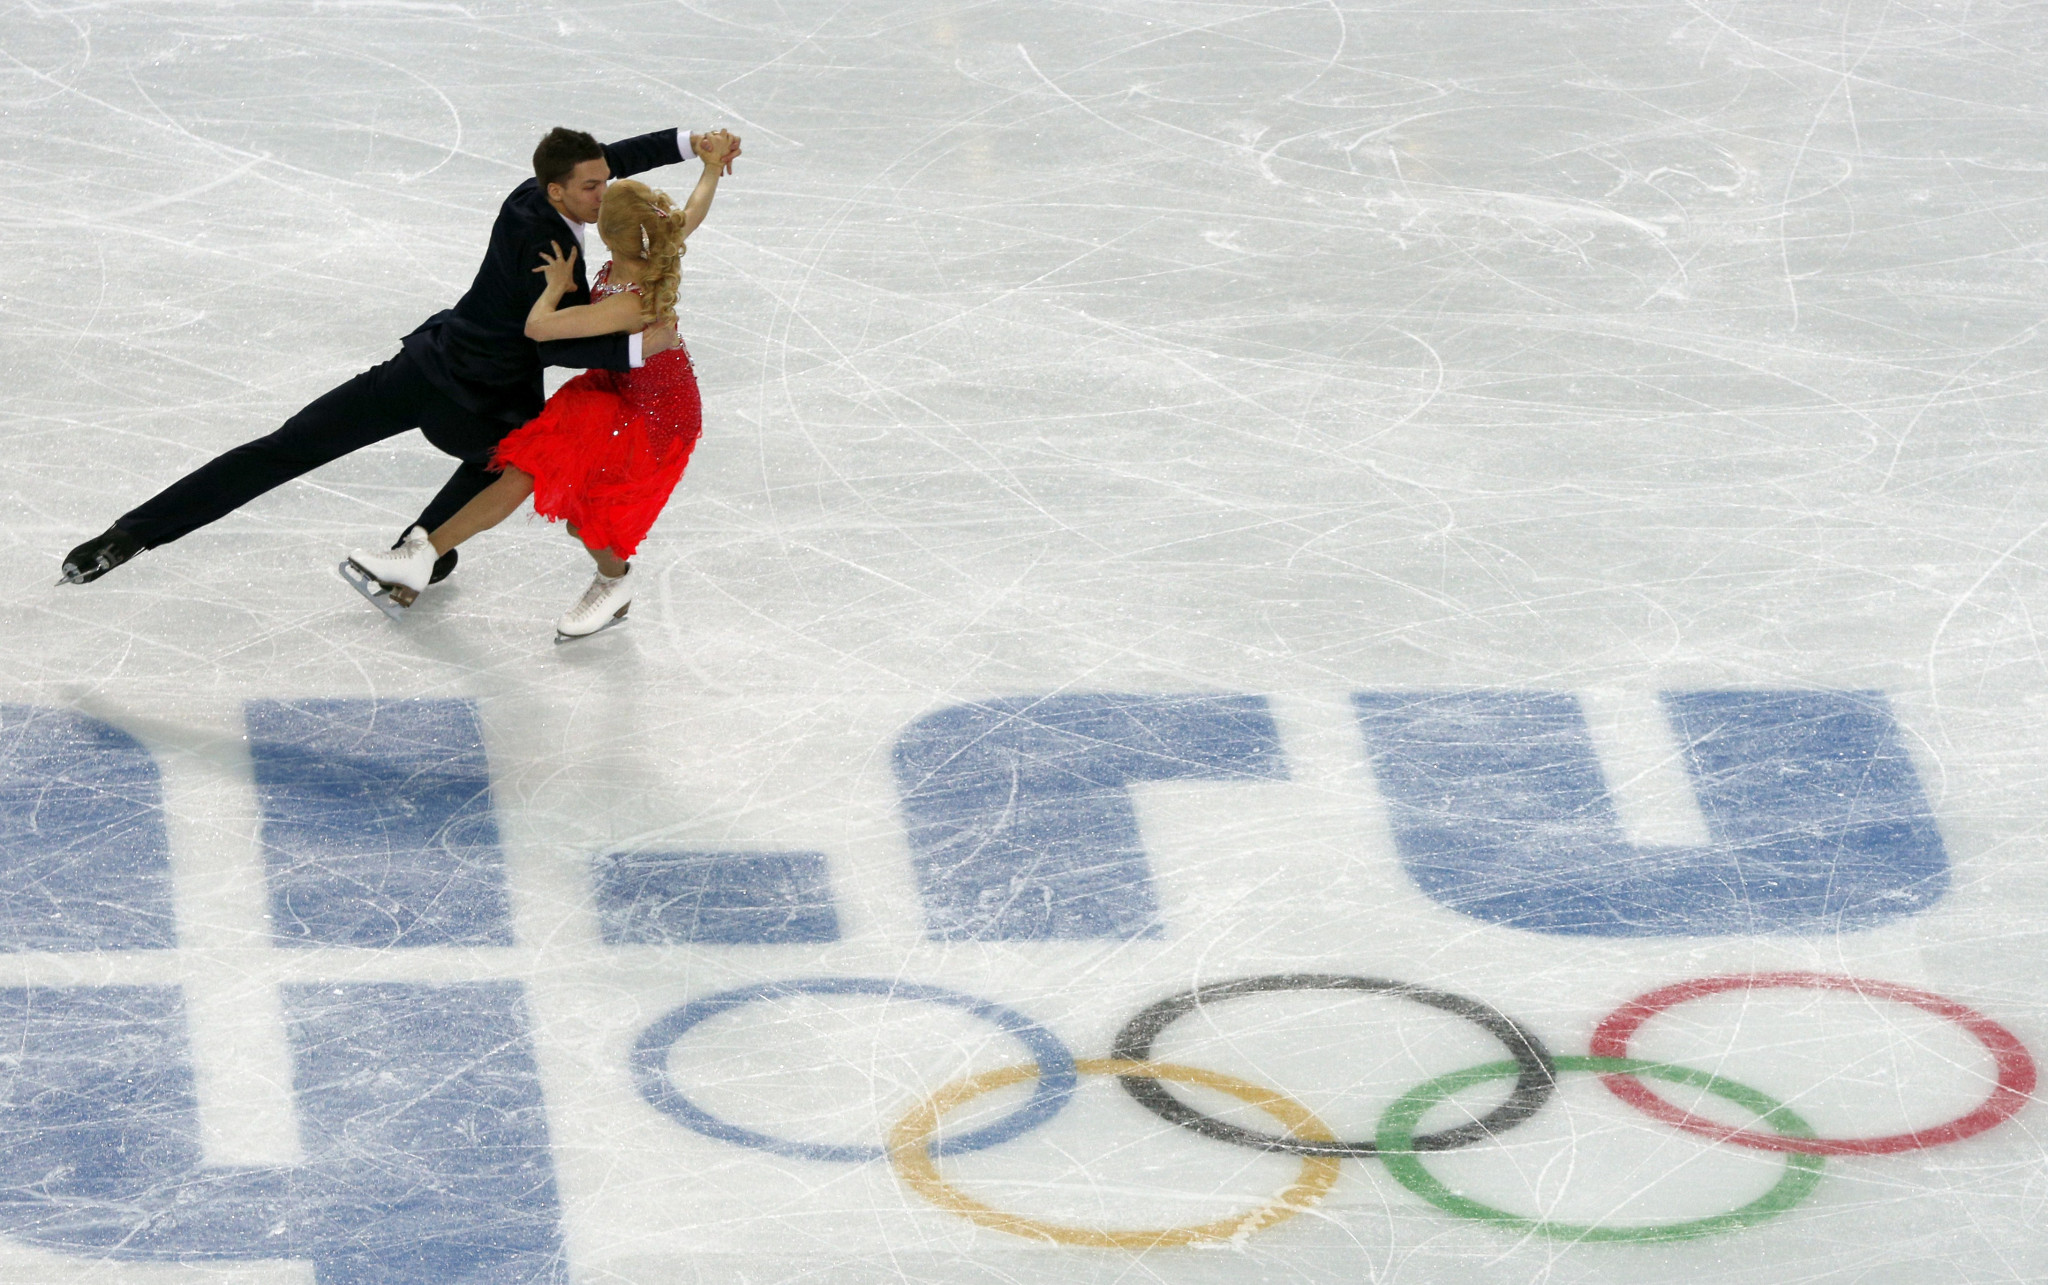 Dmitri Soloviev and Ekaterina Bobrova were part of the Russian squad to win team event gold at Sochi 2014 ©Getty Images